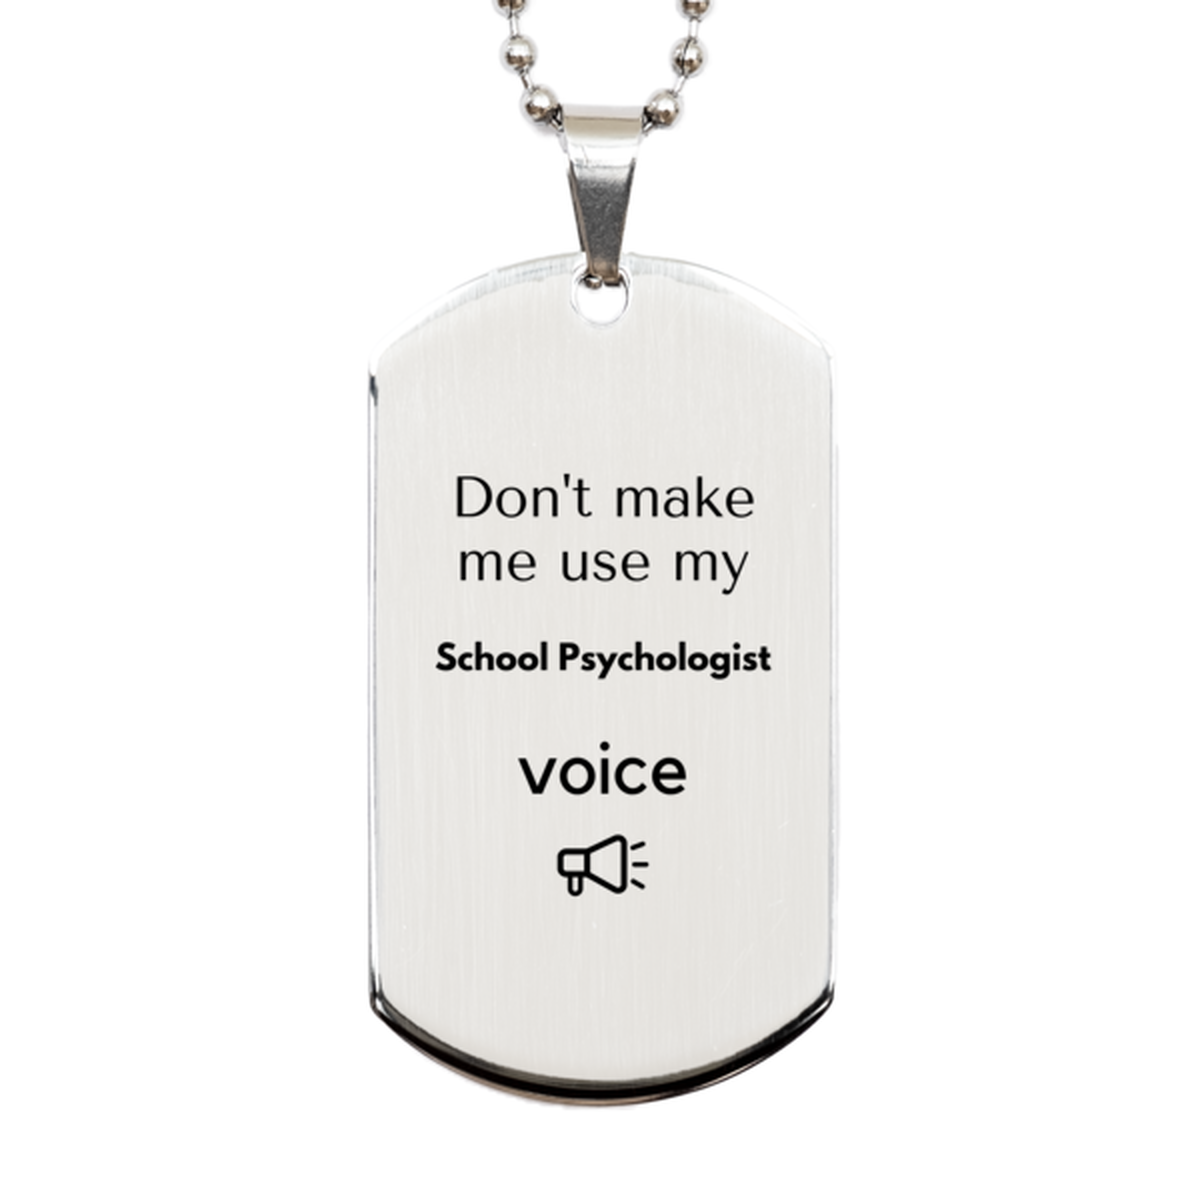 Don't make me use my School Psychologist voice, Sarcasm School Psychologist Gifts, Christmas School Psychologist Silver Dog Tag Birthday Unique Gifts For School Psychologist Coworkers, Men, Women, Colleague, Friends